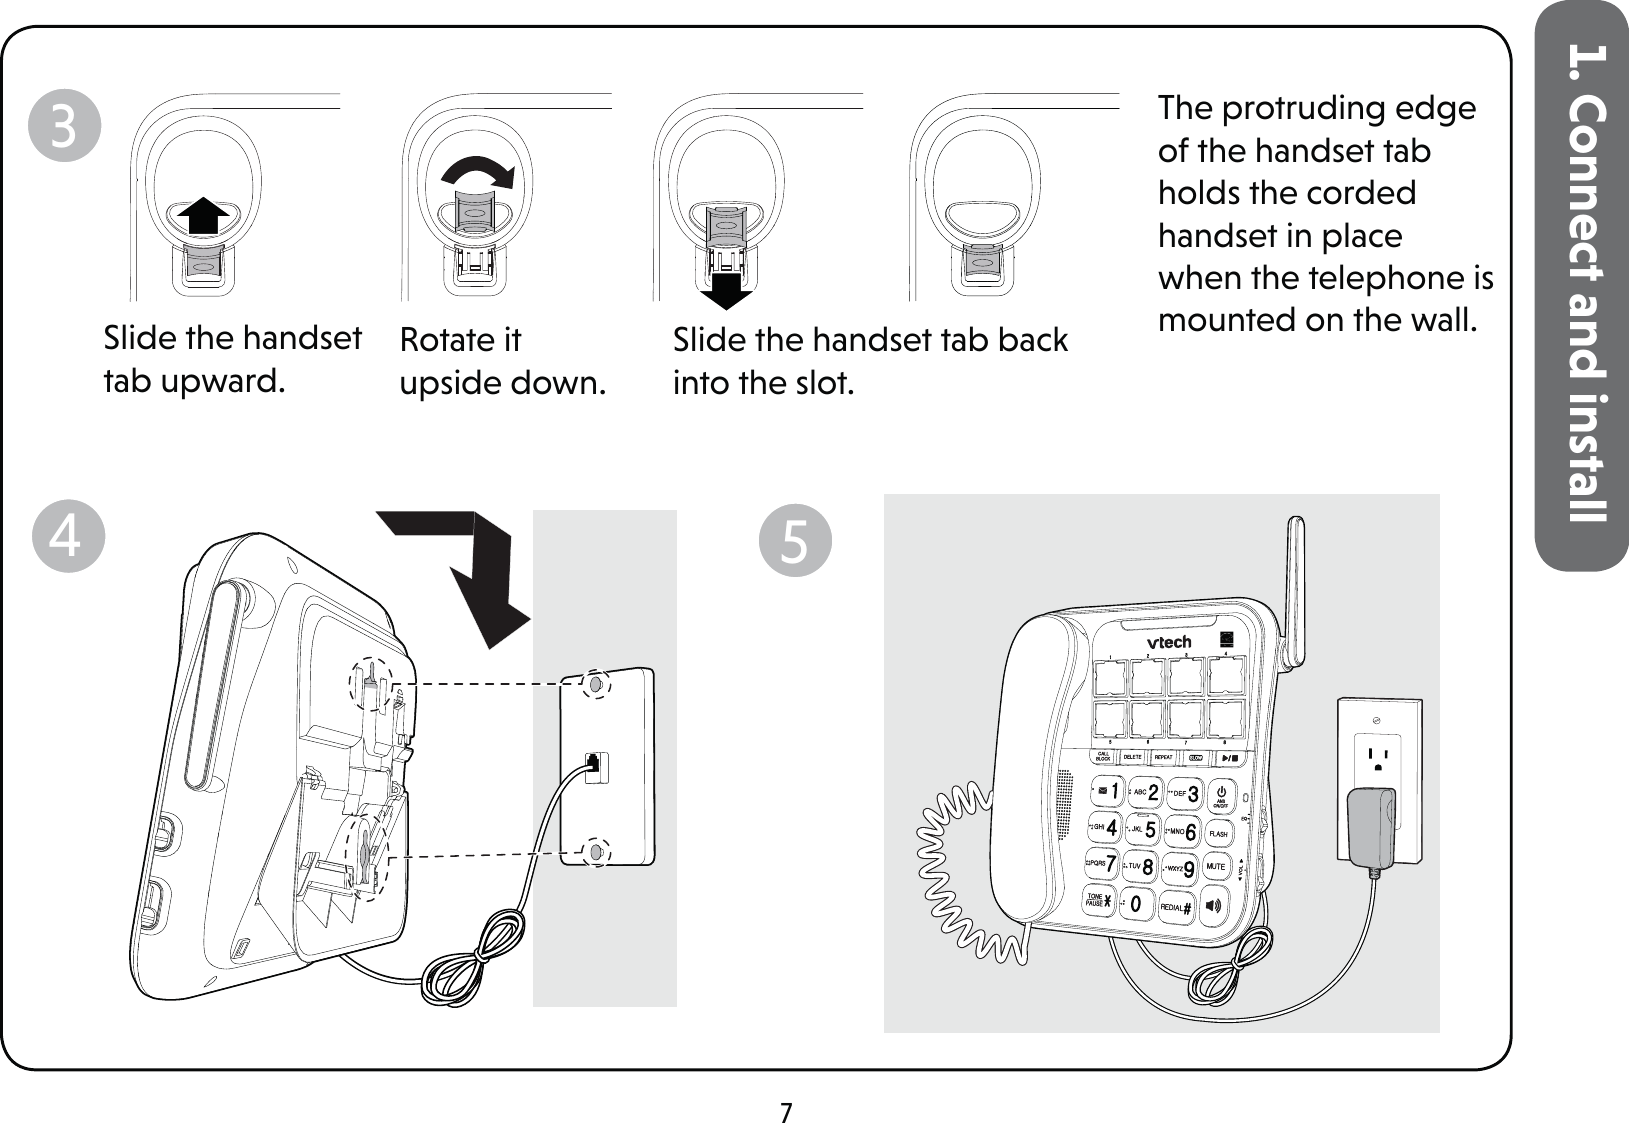 71. Connect and installSlide the handset tab upward.Rotate it upside down.Slide the handset tab back into the slot.The protruding edge of the handset tab holds the corded handset in place when the telephone is mounted on the wall.345